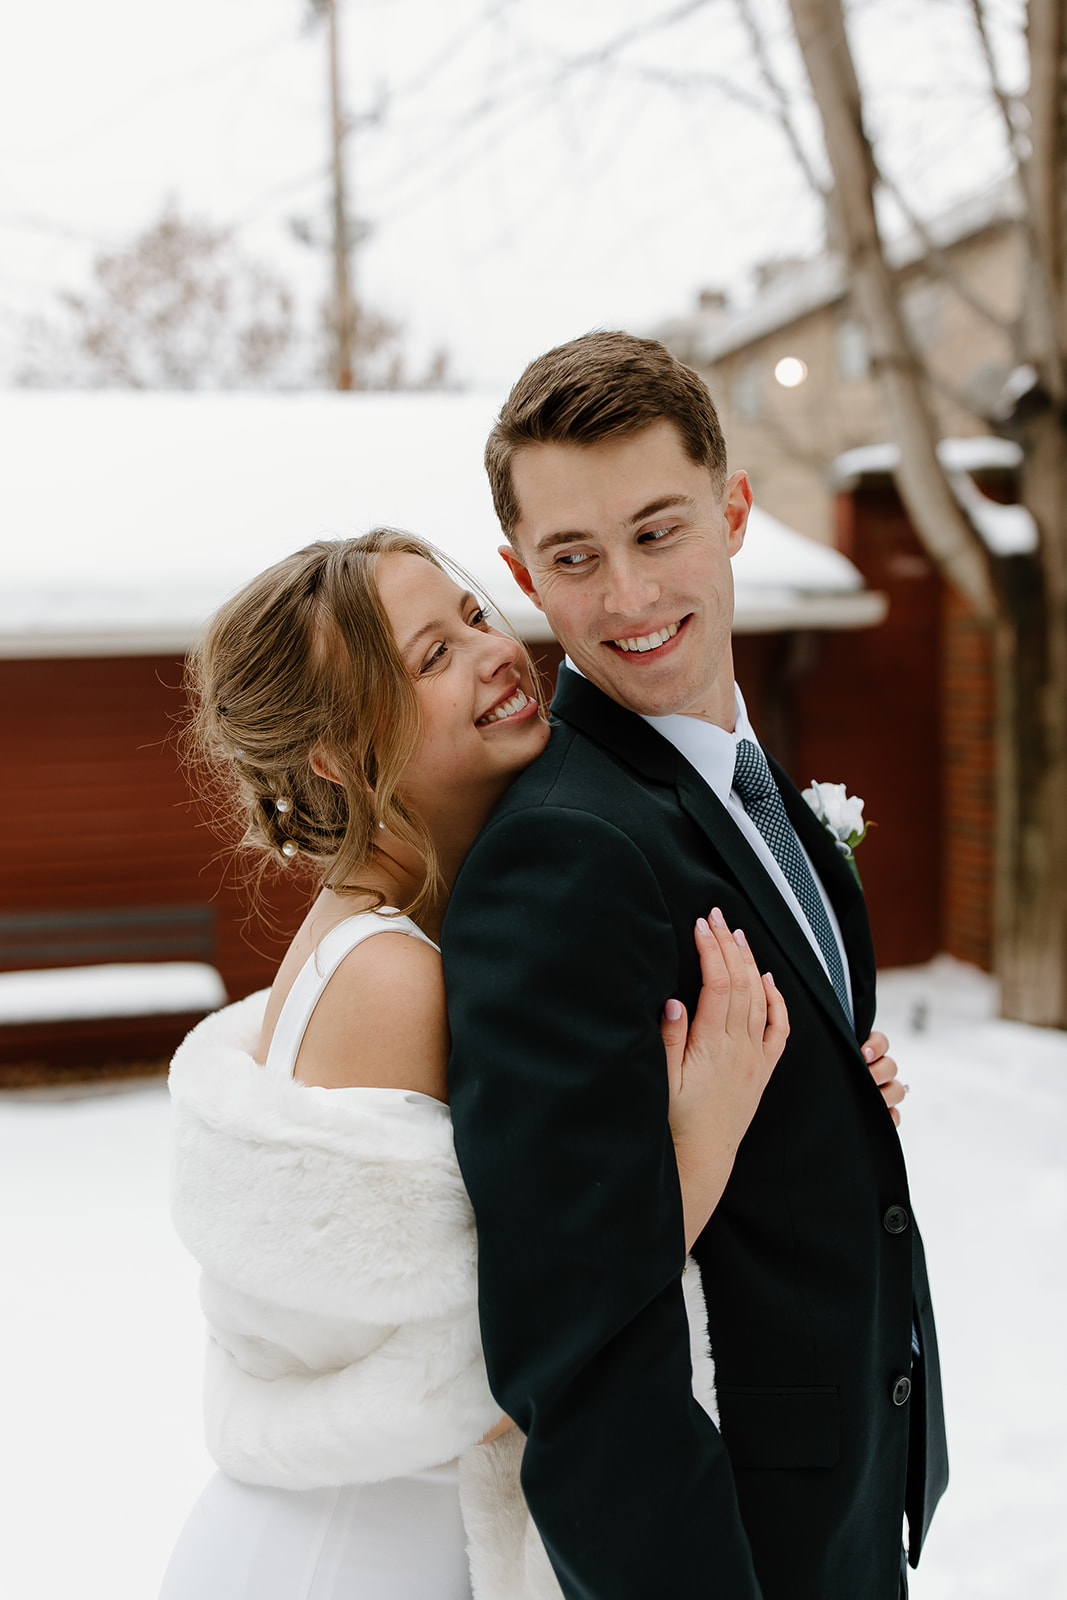 Bride and groom outside in the snow